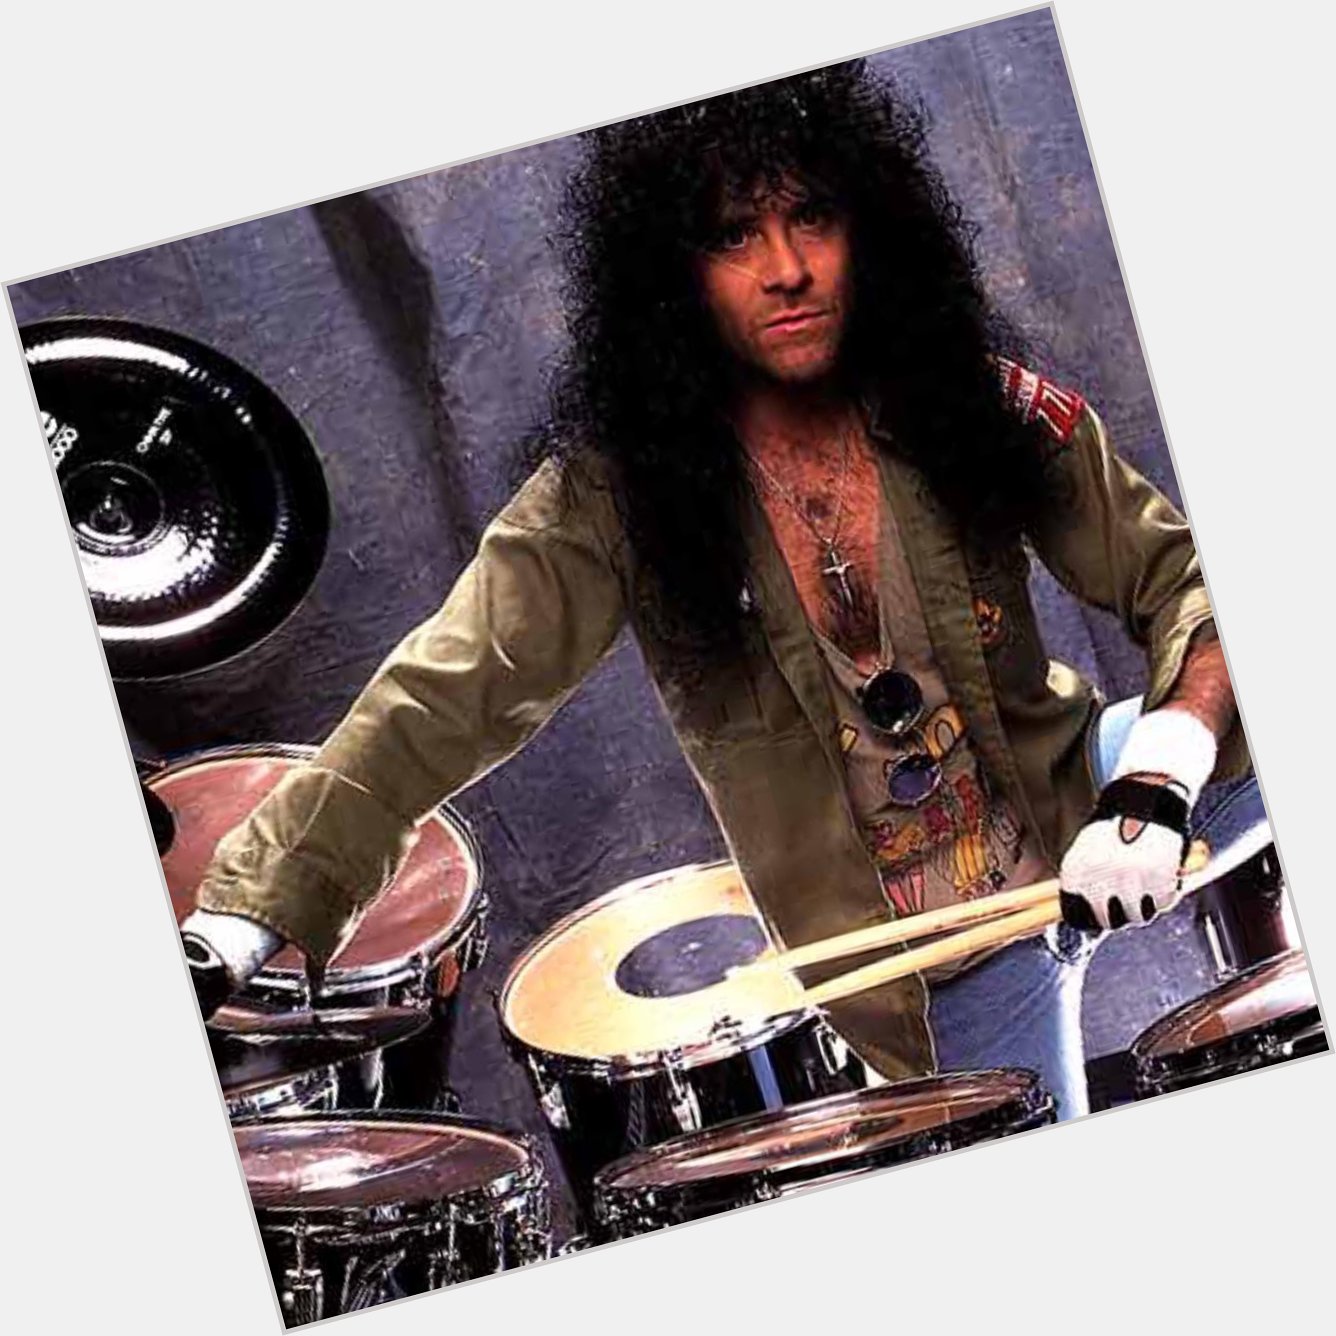 Happy Birthday Eric Carr ... Forever missed 